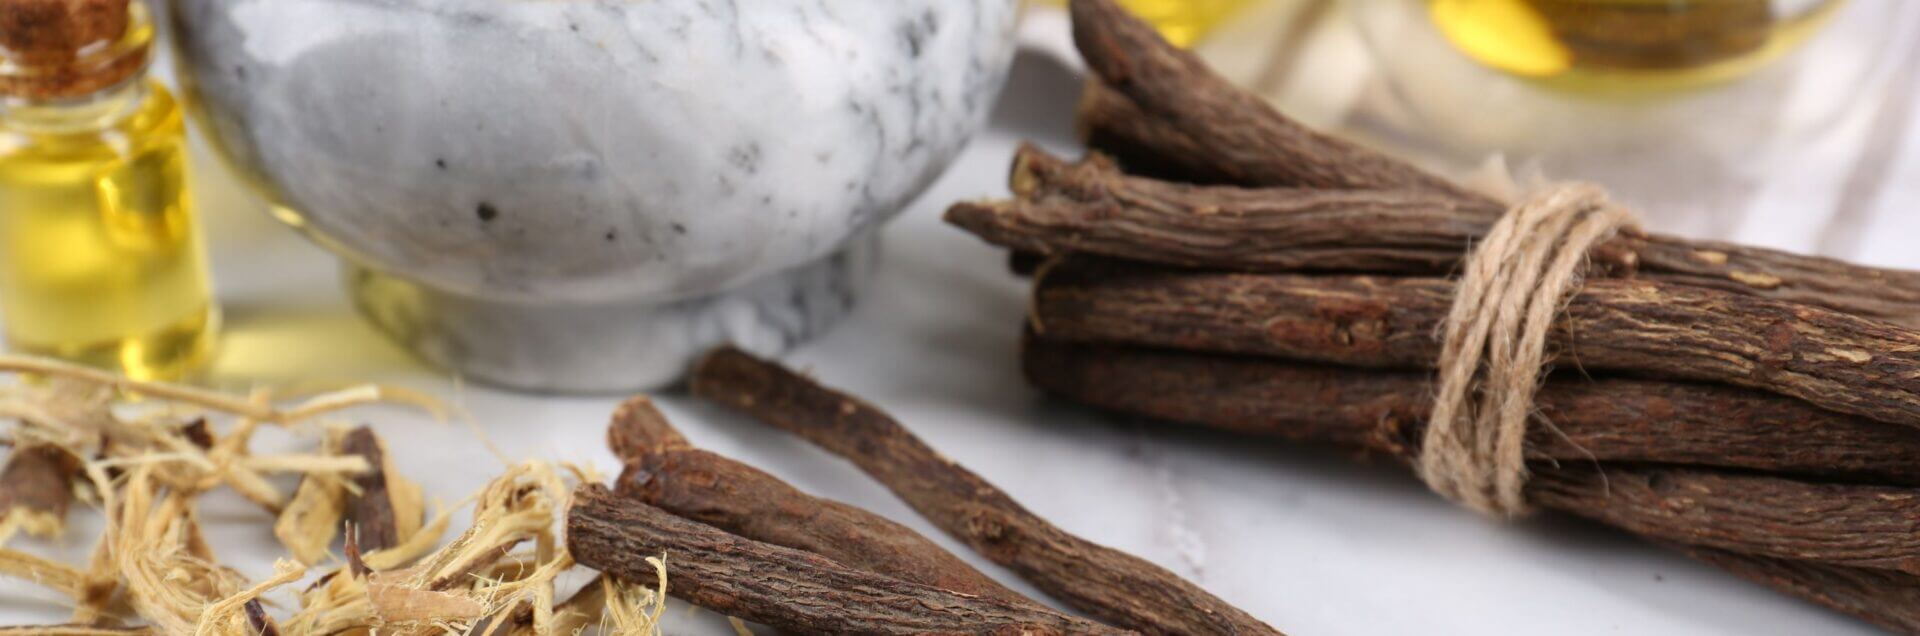 Licorice Root Benefits, Licorice root in different forms as the root, a power, and tonic